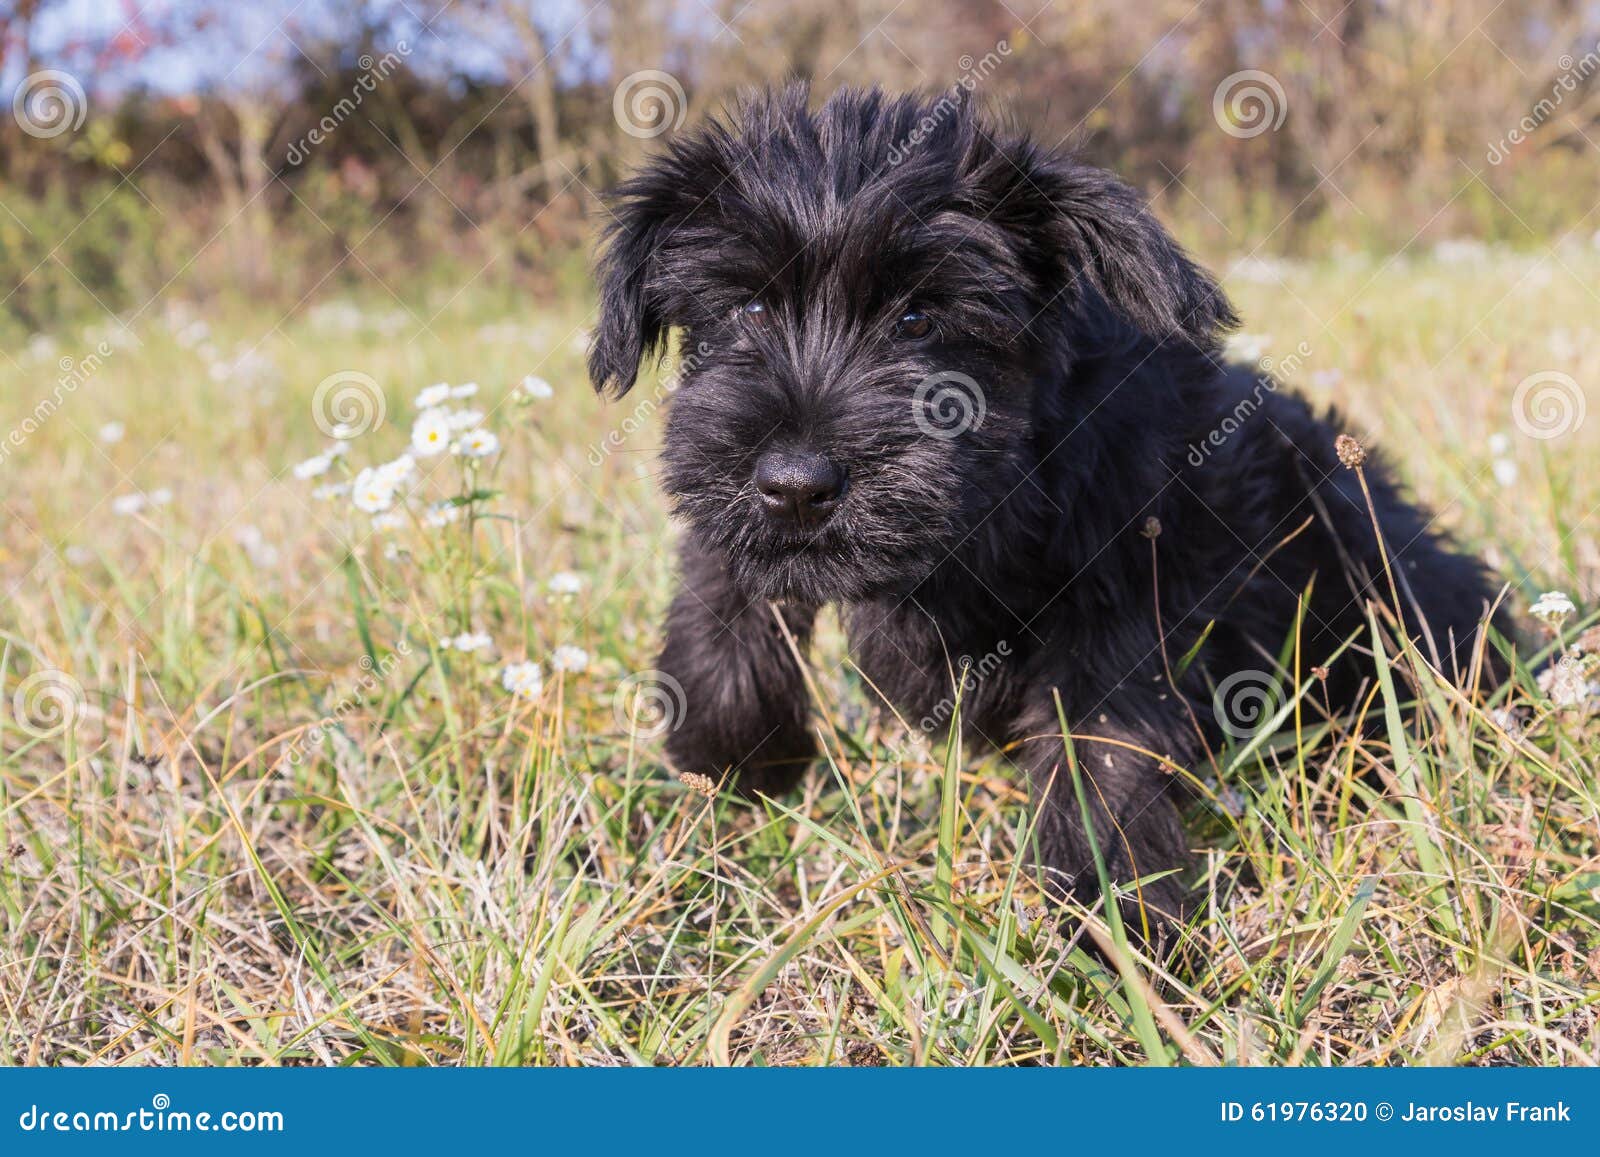 The Puppy of Giant Black Schnauzer Dog is Jumping Stock Photo - Image ...